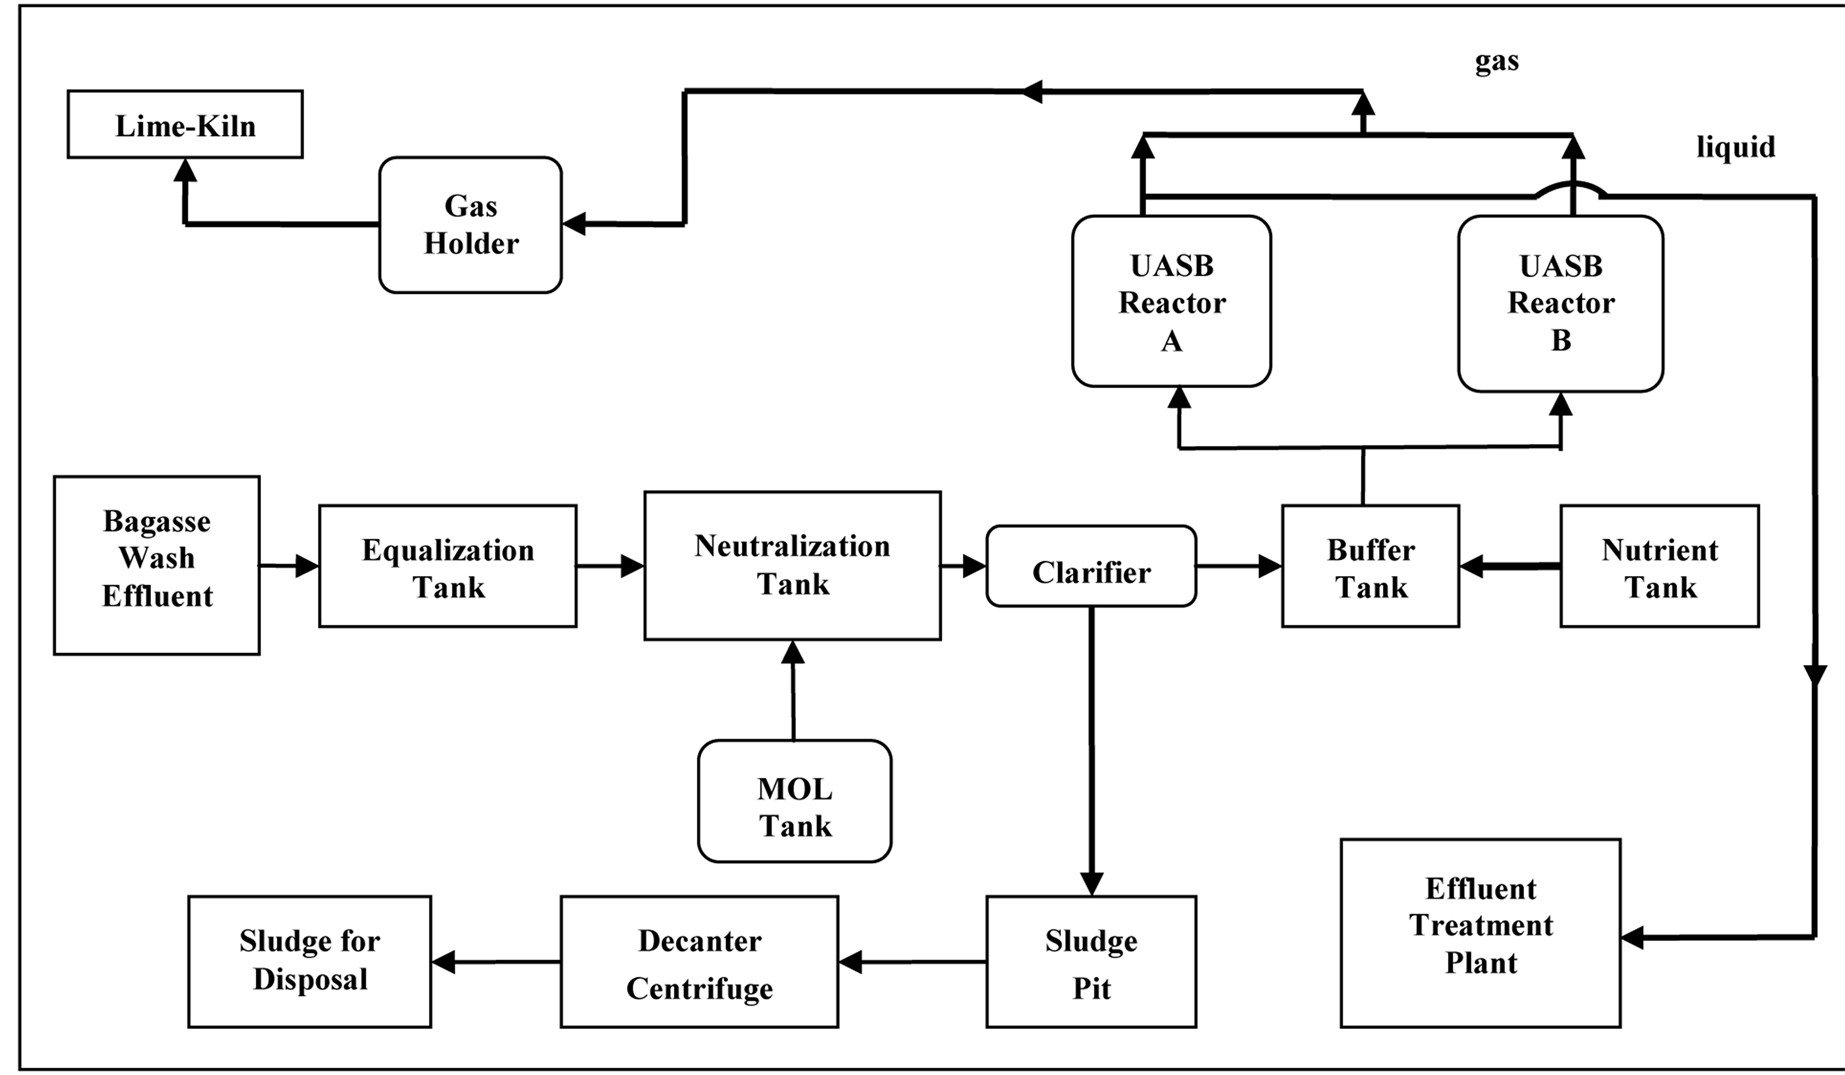 Economic Analysis of a Large UASB Reactor Producing Biogas from Baggase